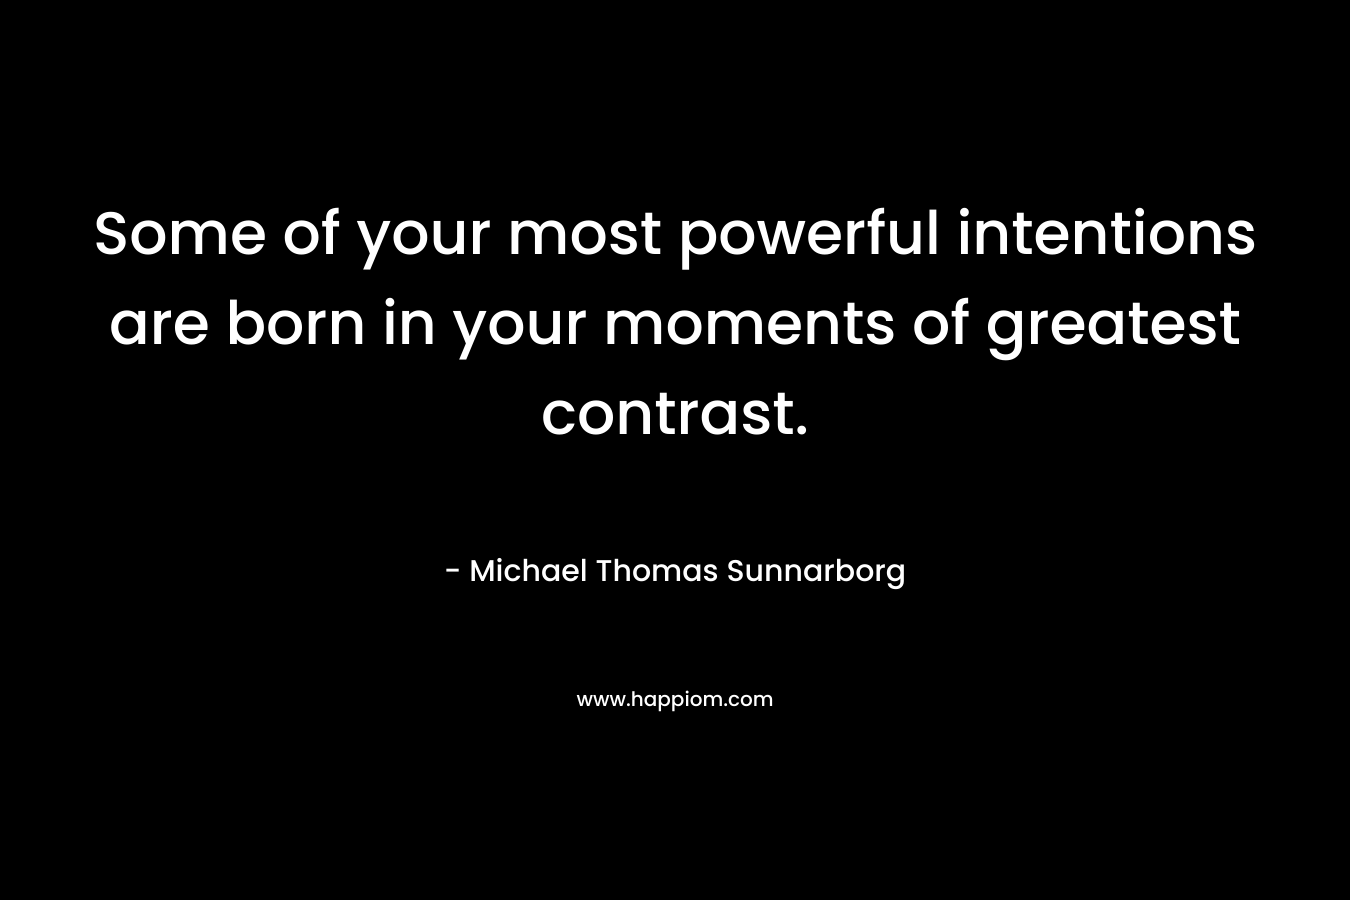 Some of your most powerful intentions are born in your moments of greatest contrast.